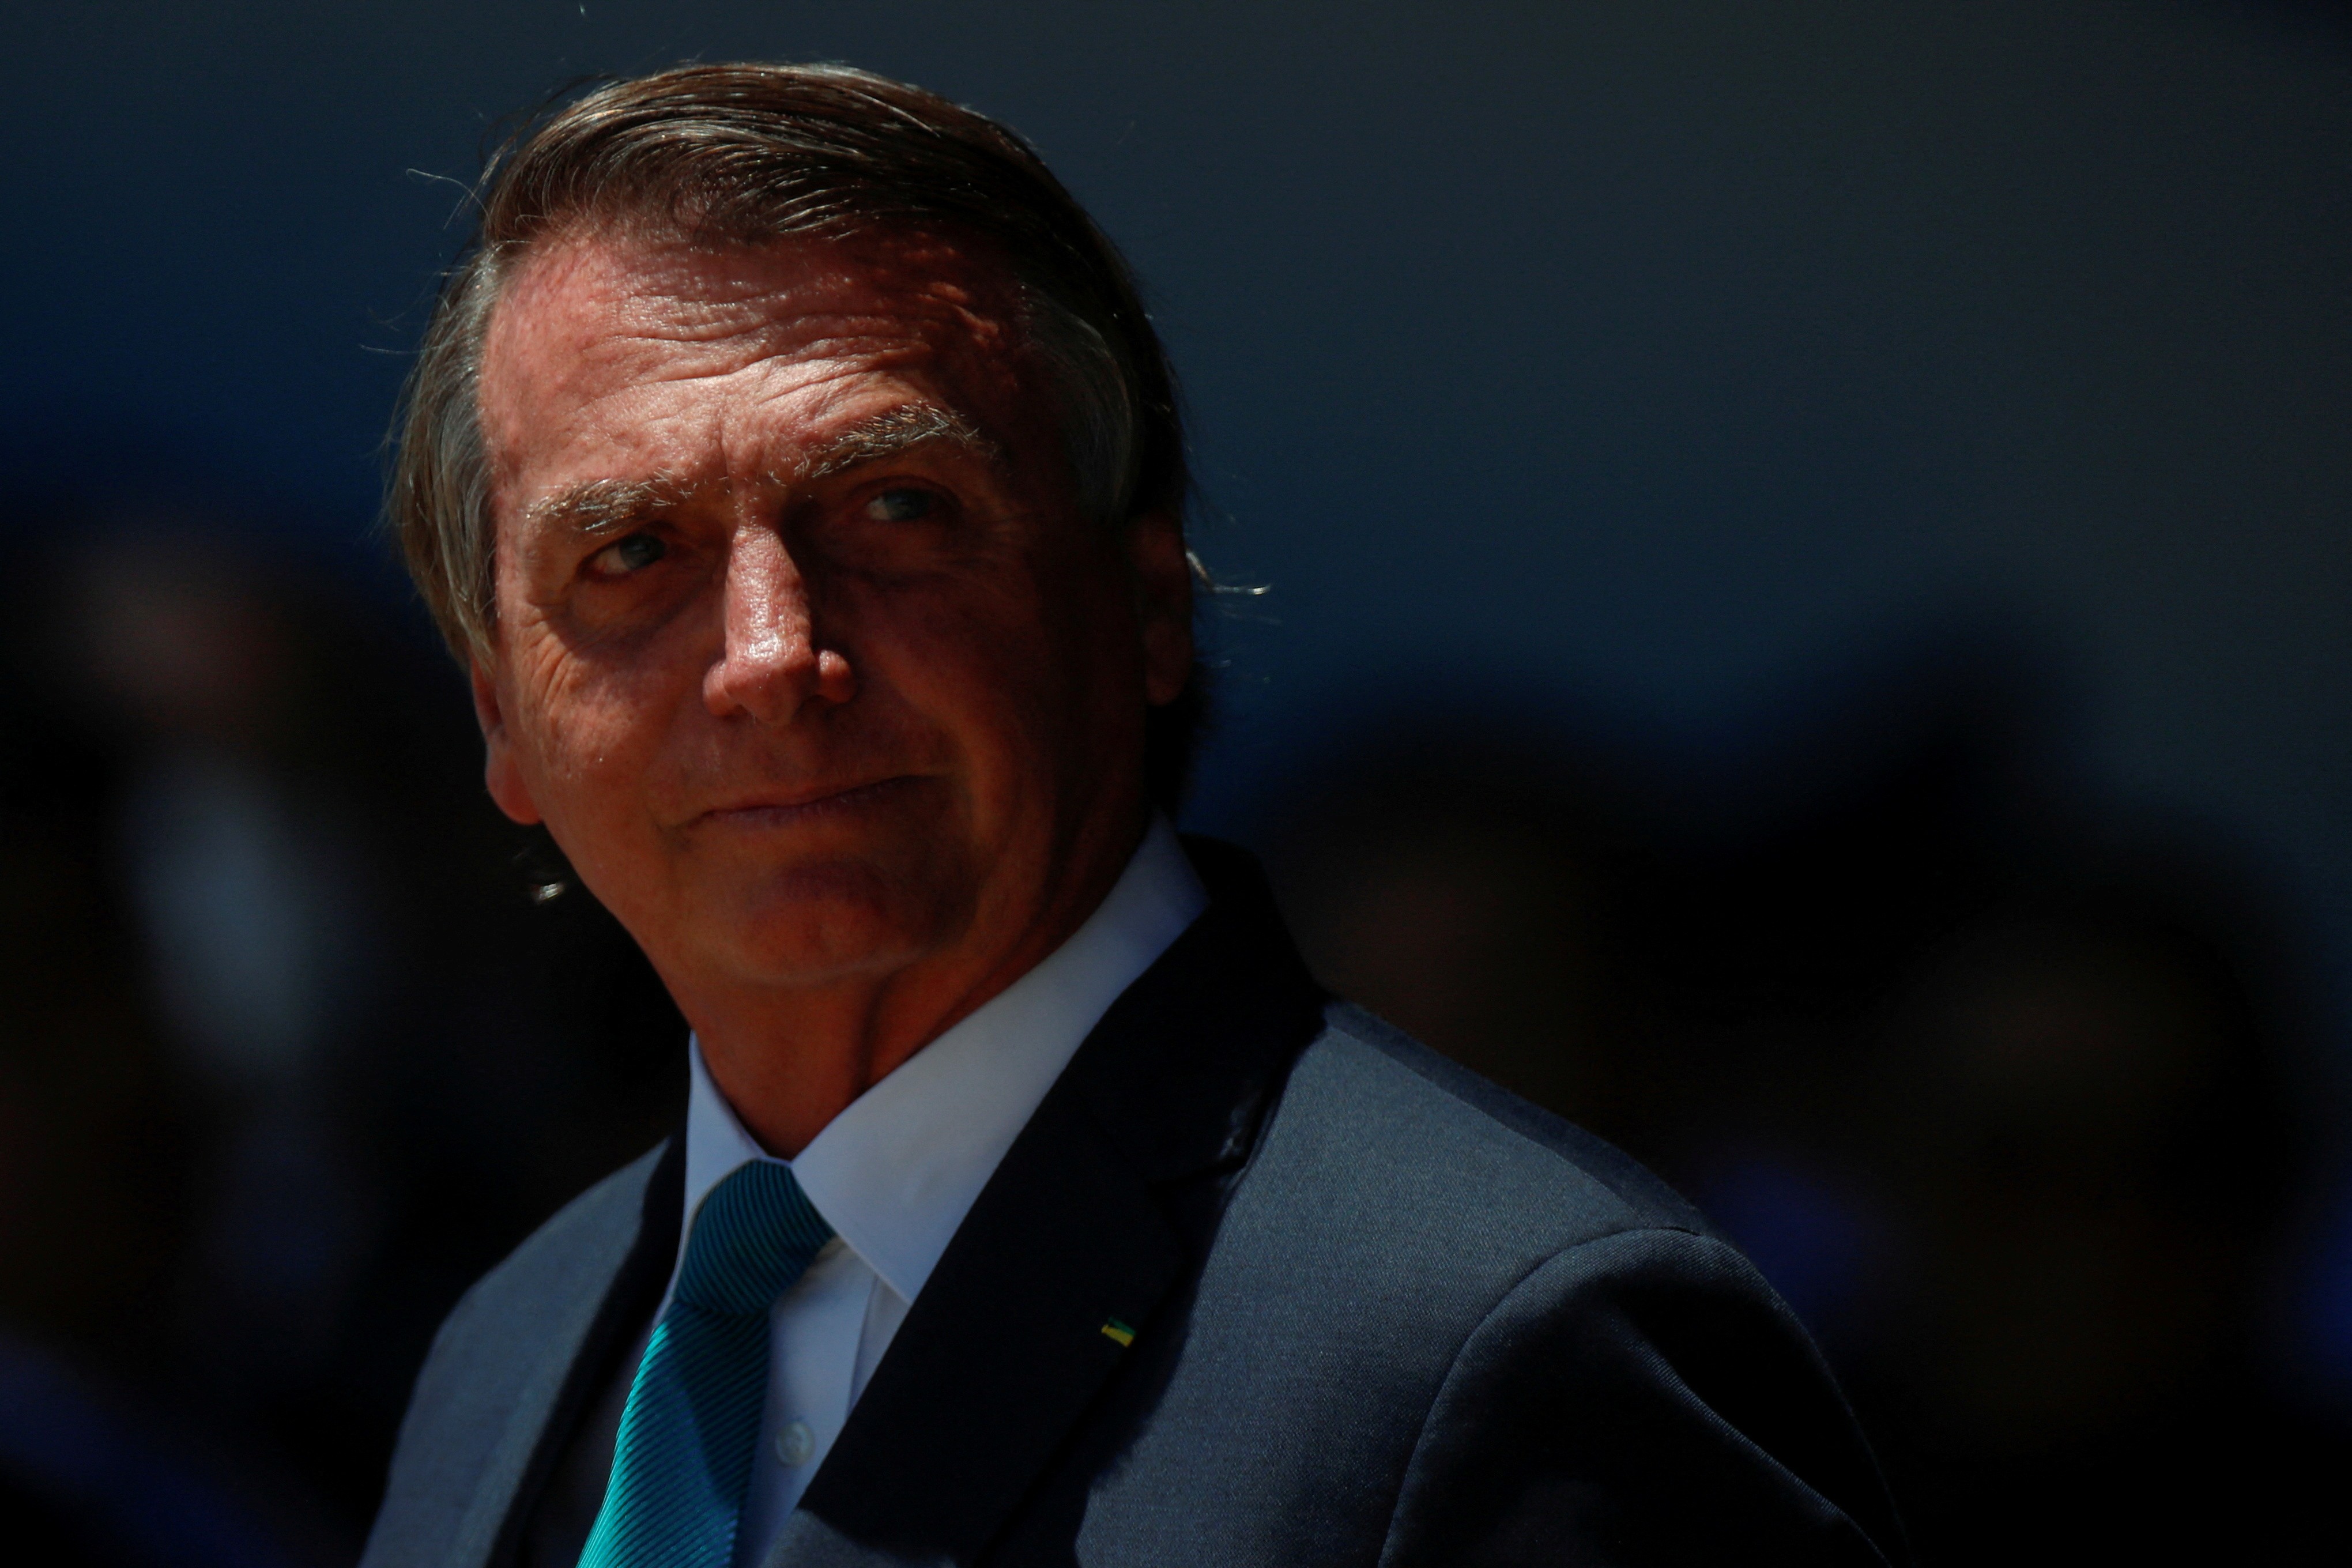 Brazil's President Jair Bolsonaro looks on during a welcoming ceremony to receive Brazilians and foreigners evacuated from Ukraine during a repatriation mission, at Brasilia Air Base, in Brasilia, Brazil